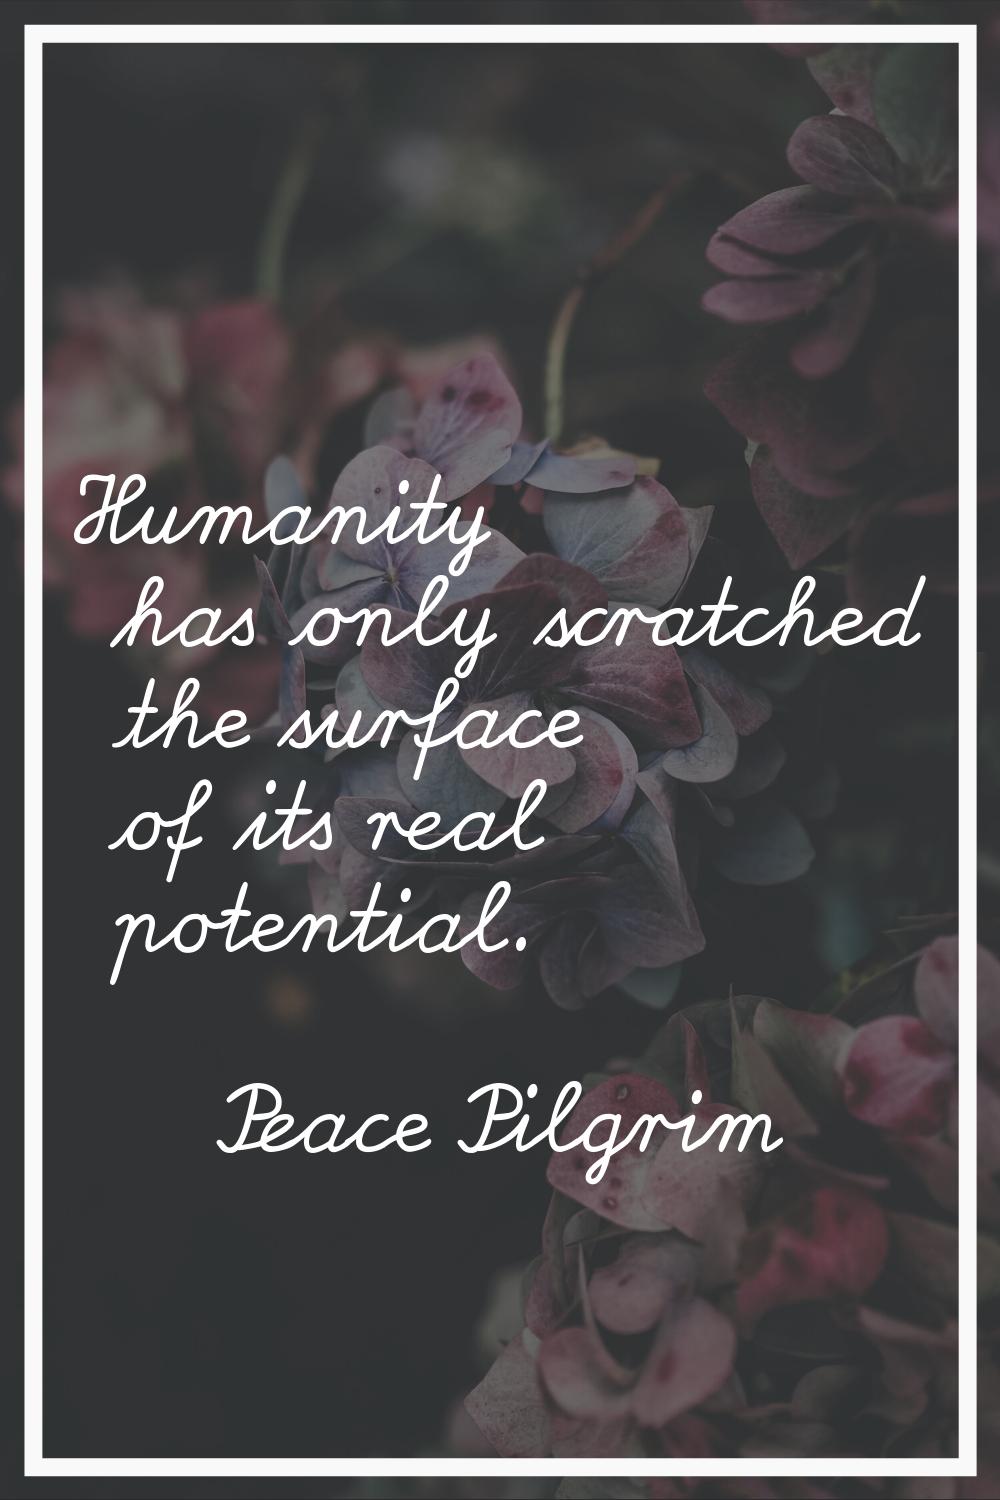 Humanity has only scratched the surface of its real potential.